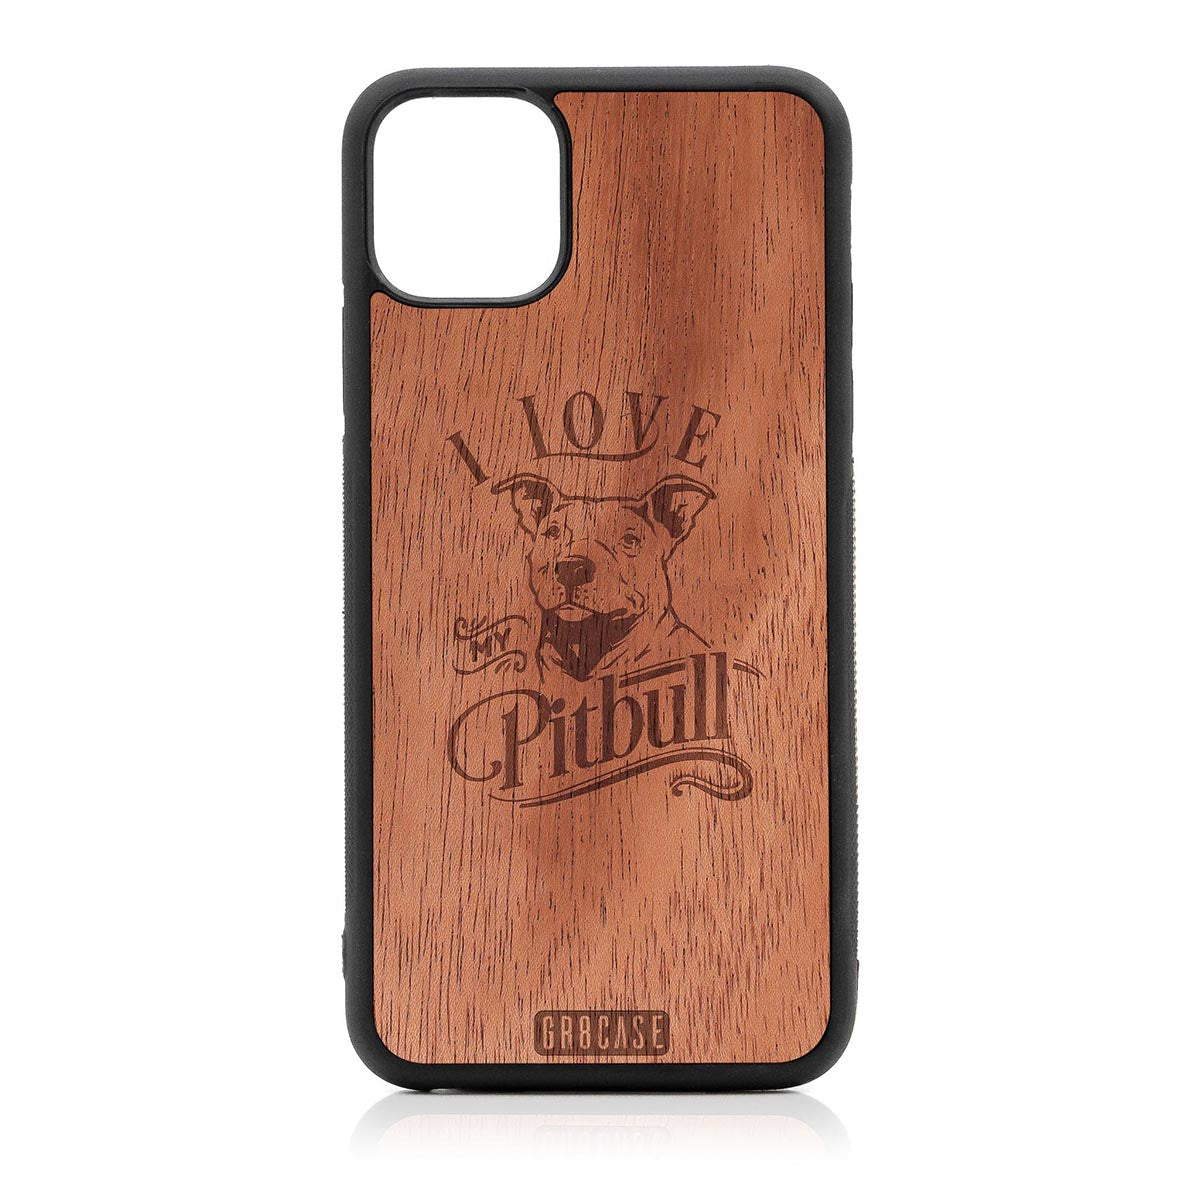 I Love My Pitbull Design Wood Case For iPhone 11 Pro Max by GR8CASE